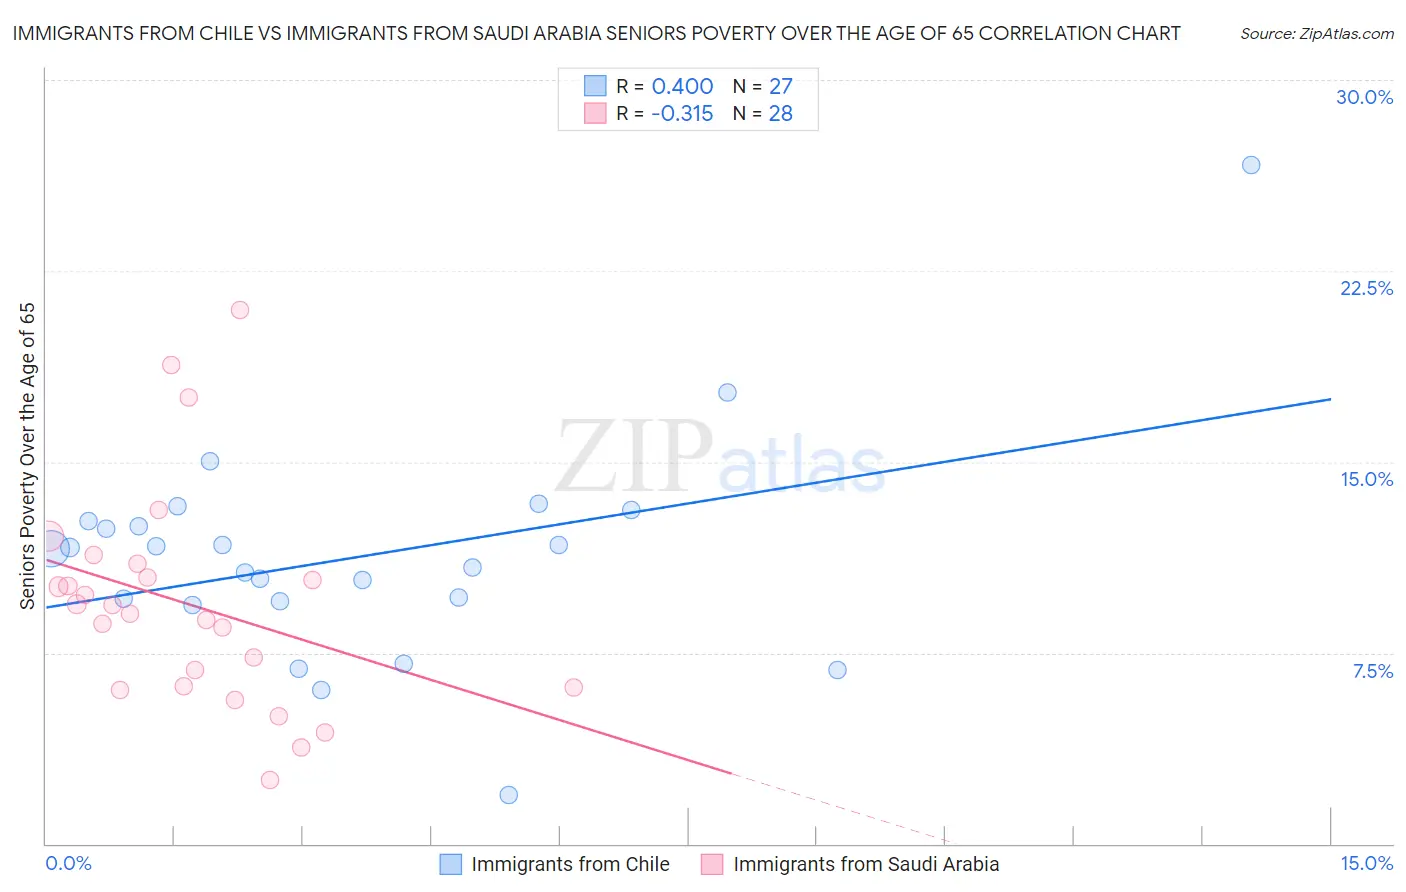 Immigrants from Chile vs Immigrants from Saudi Arabia Seniors Poverty Over the Age of 65